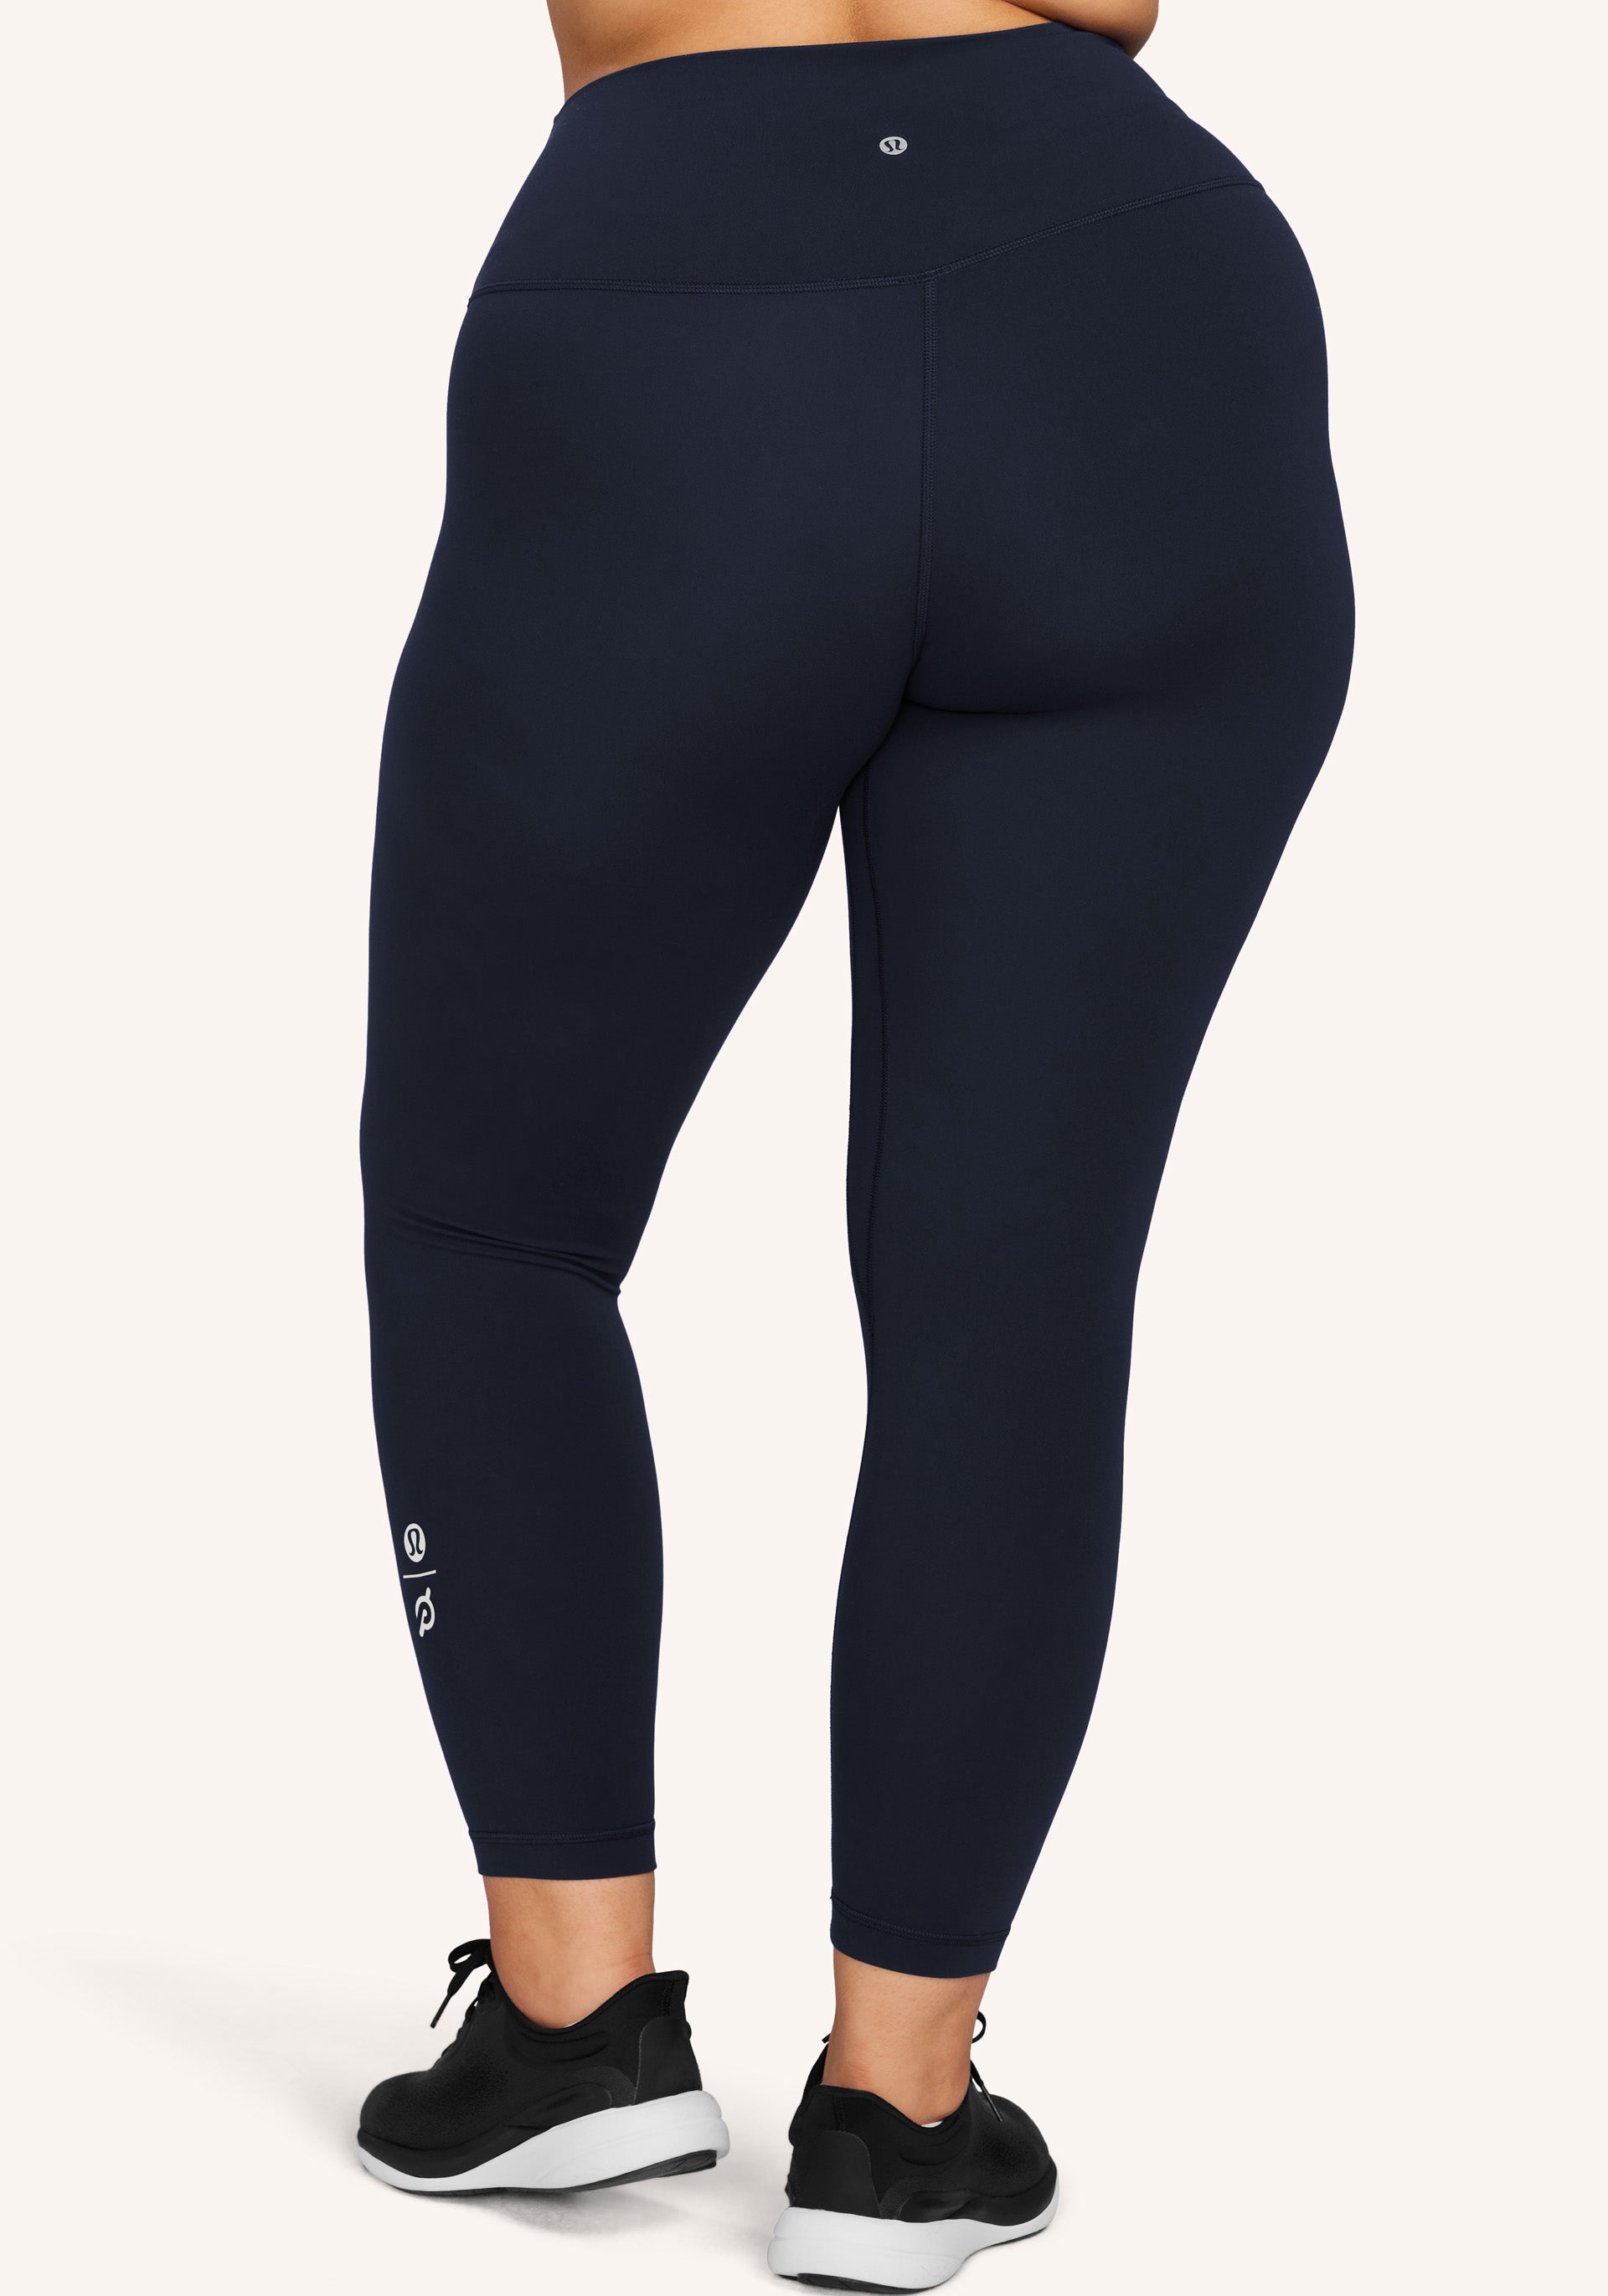 Lululemon Align High-Rise Pant 25 With Pockets – The Shop at Equinox